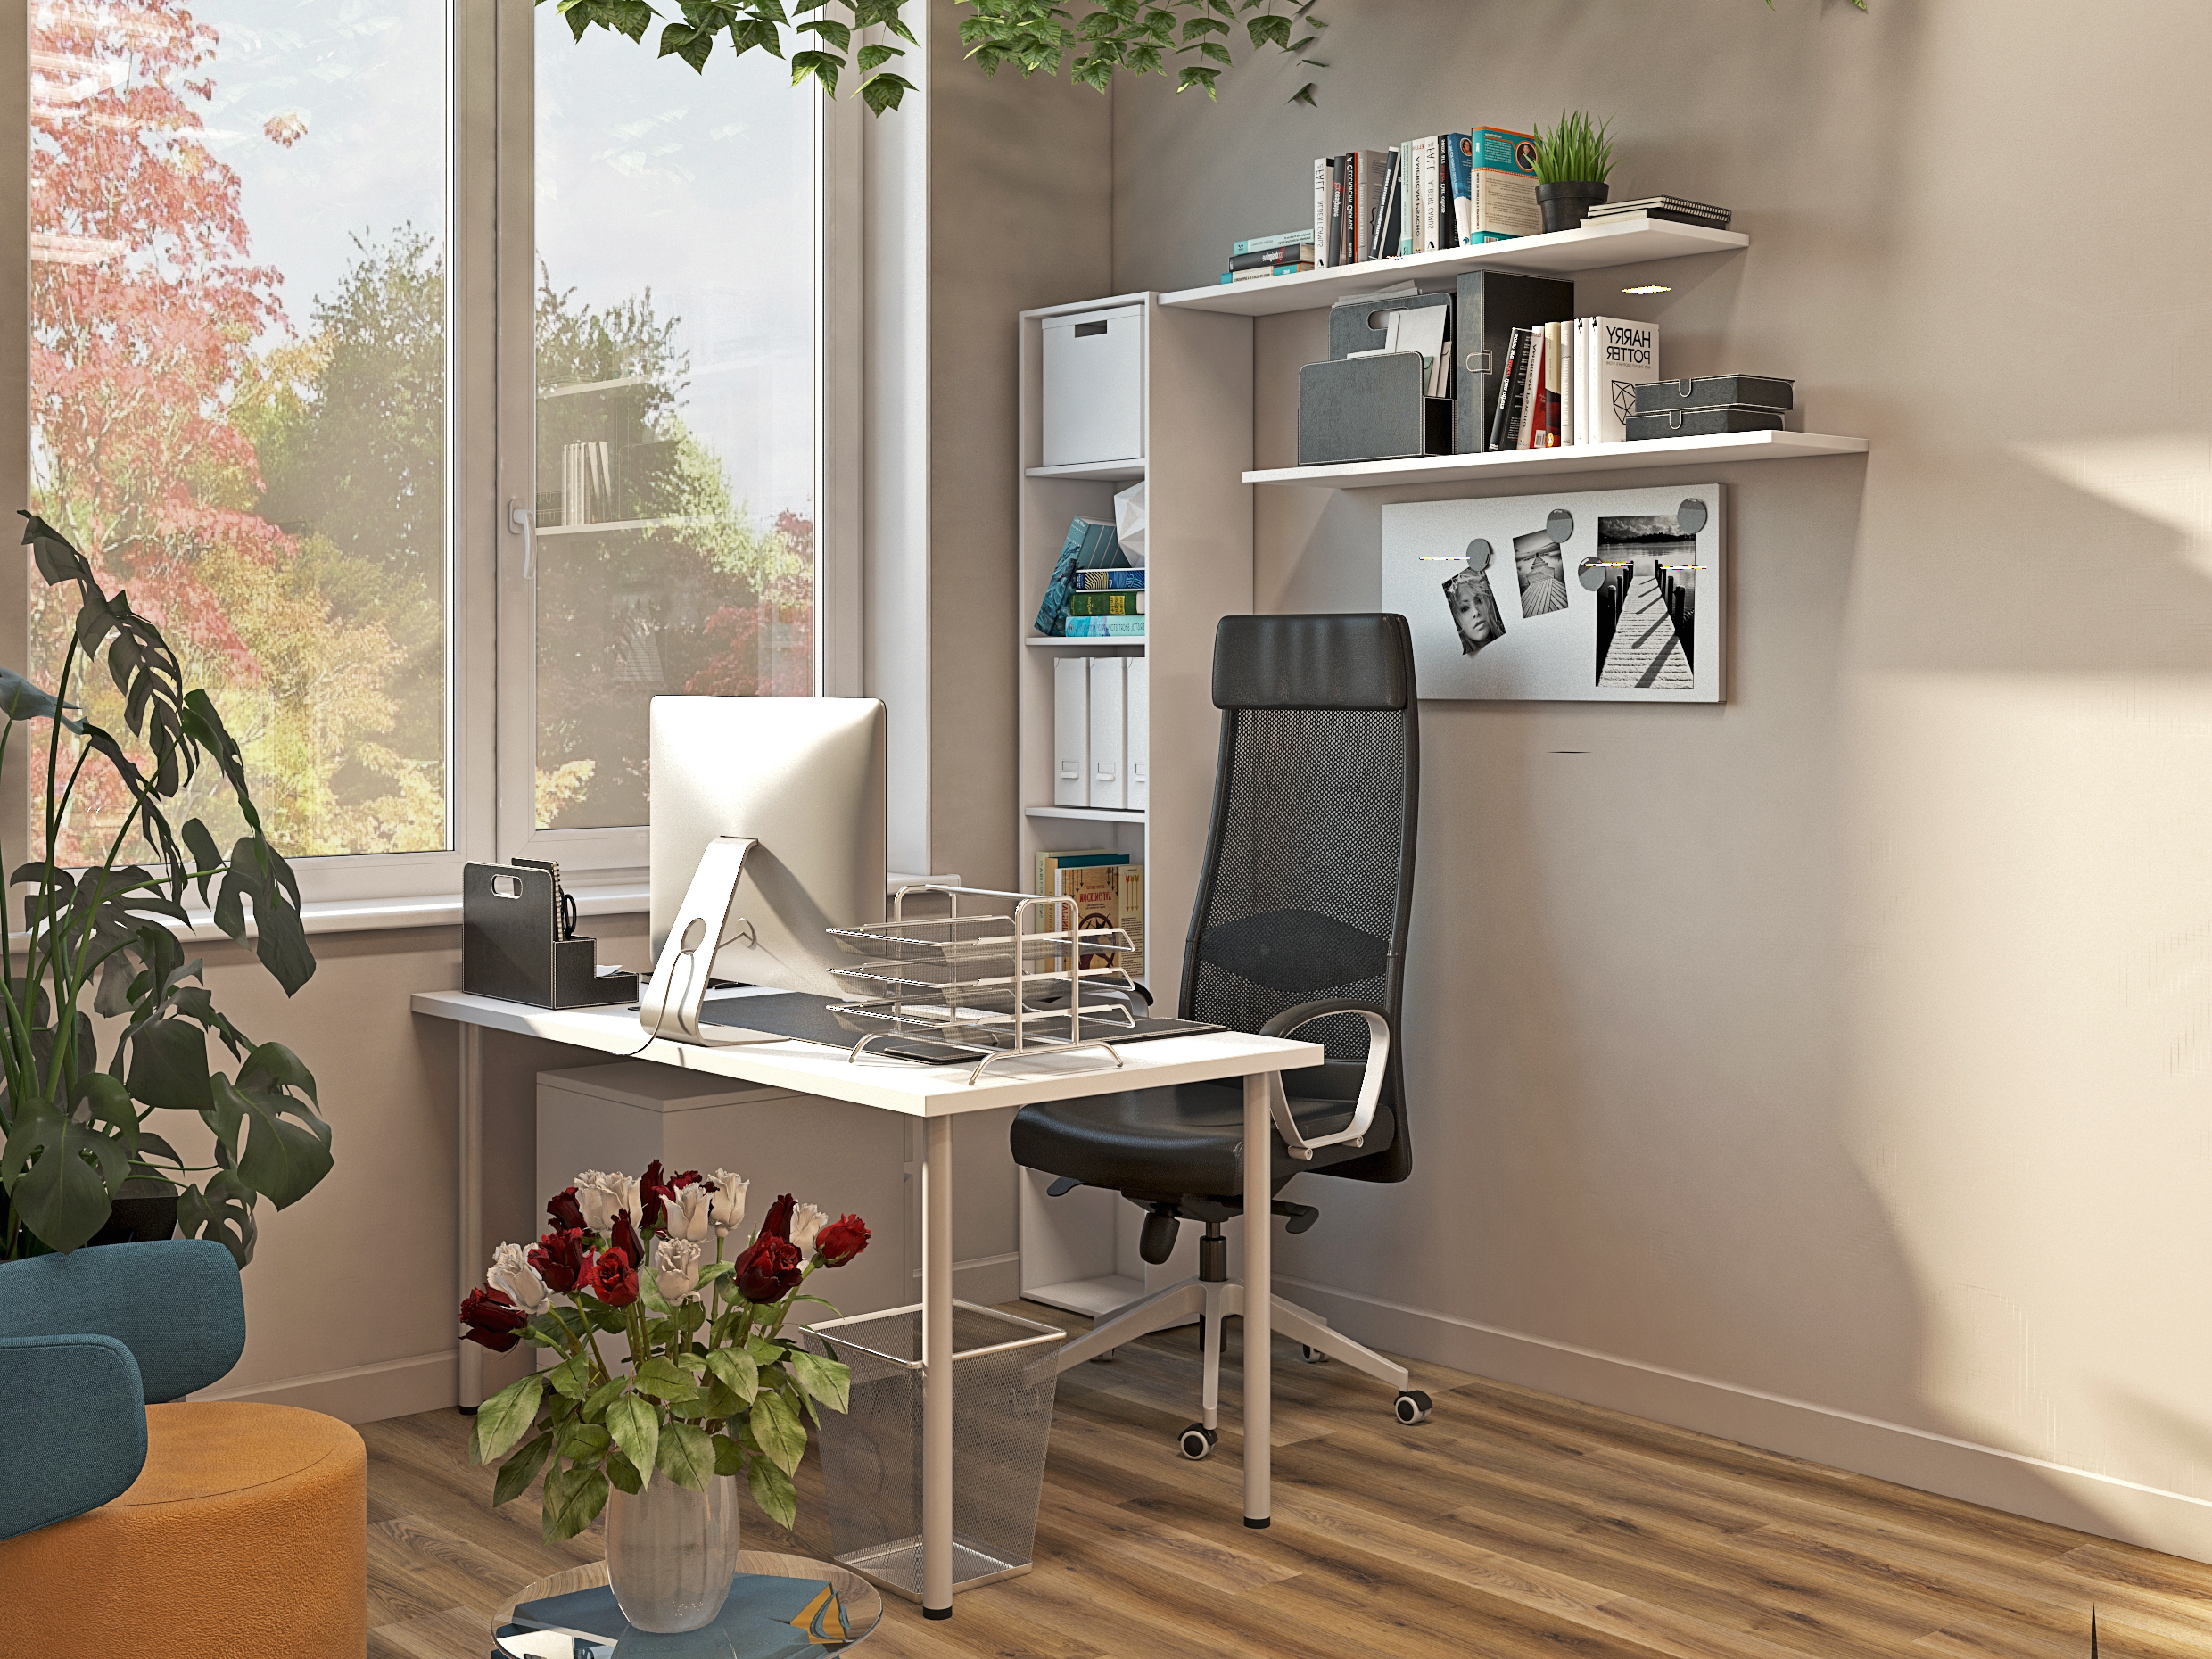 Psychologist's office in 3d max vray 3.0 image